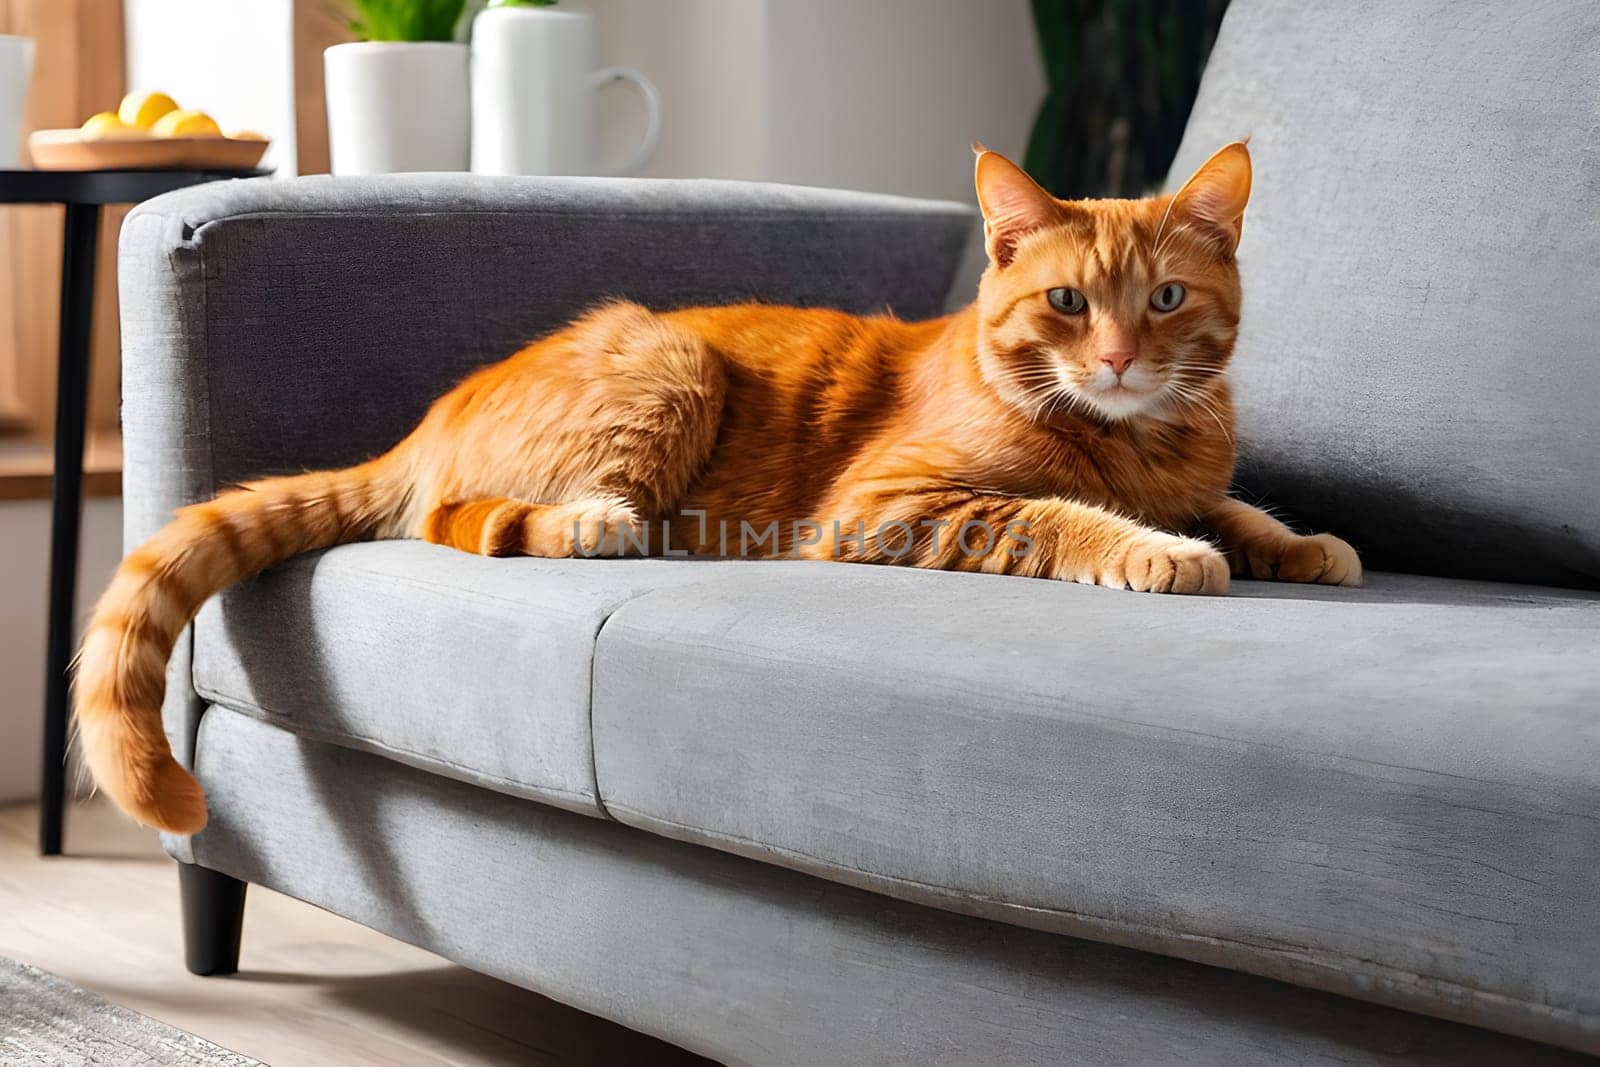 Cute red cat lying on sofa in living room.